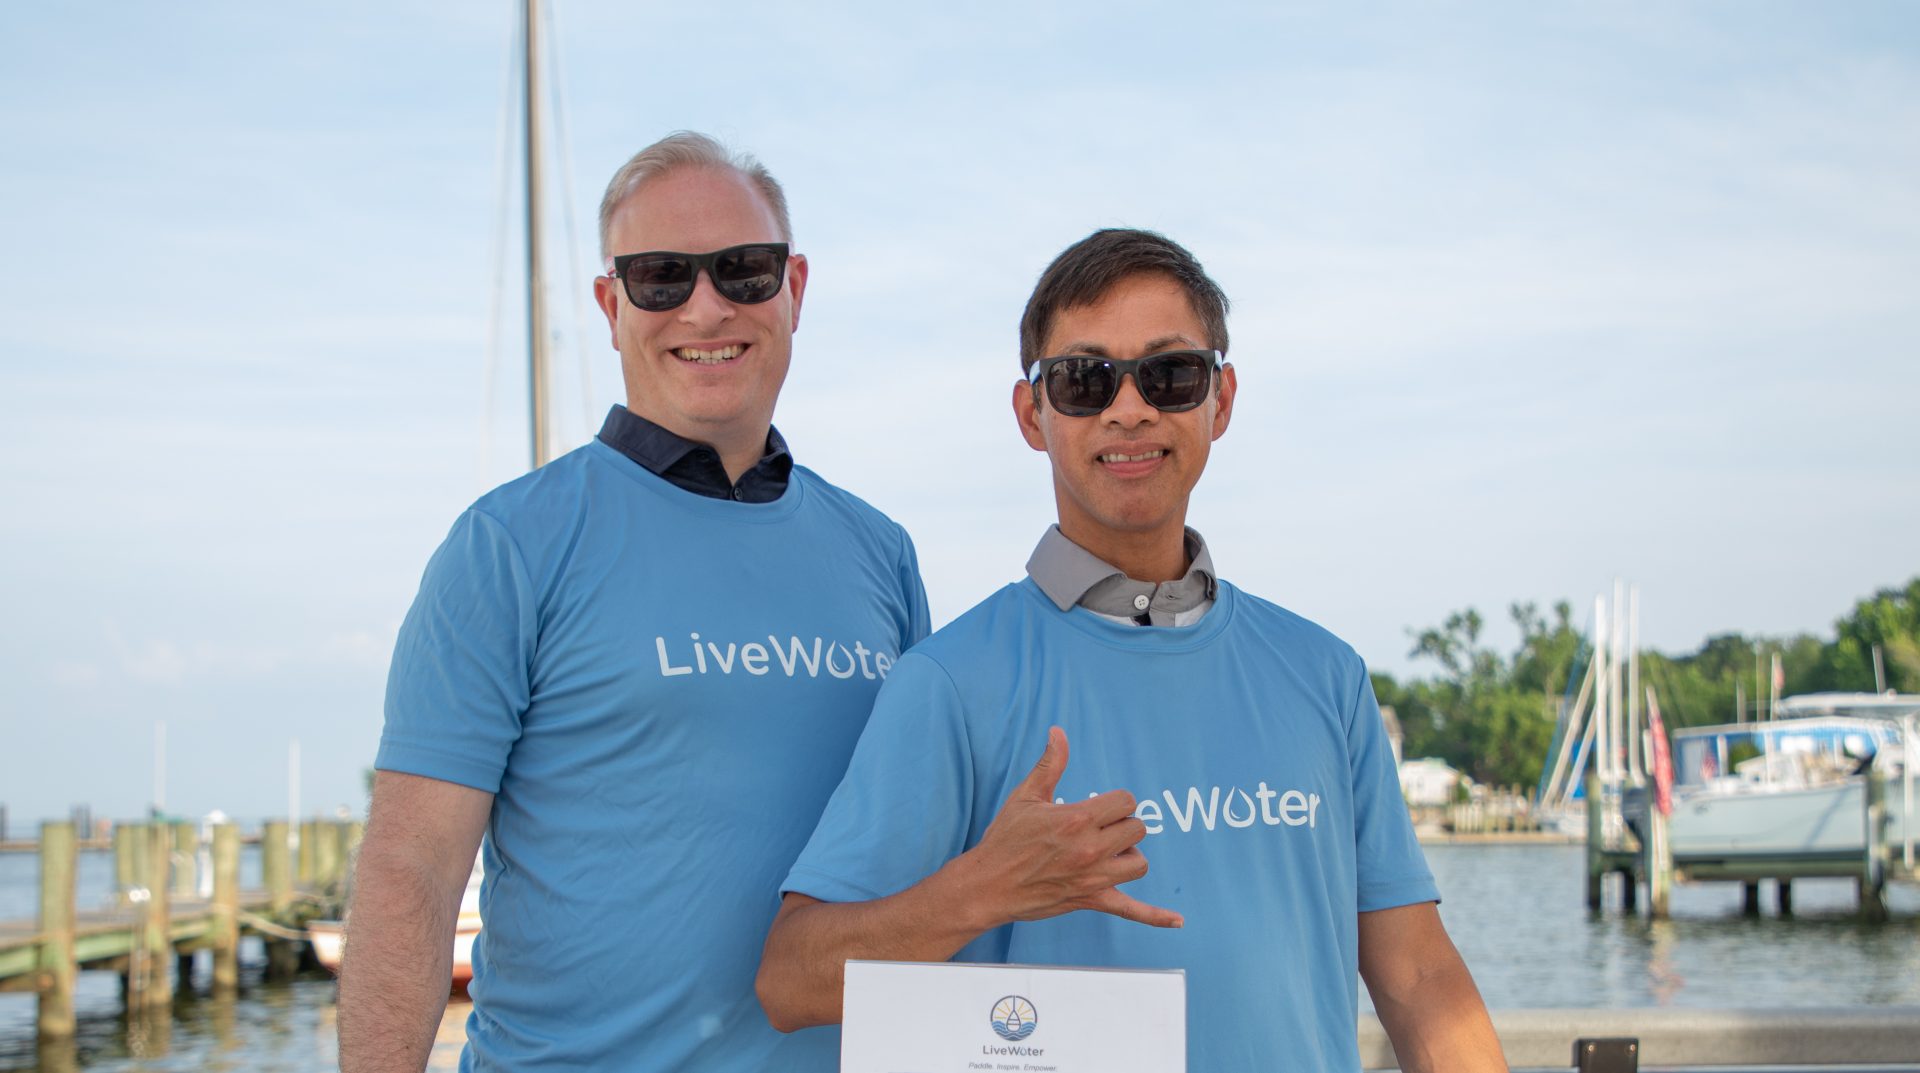 Two men stand smiling, wearing blue LiveWater t-shirts, in front of a waterfront. One is throwing a shaka.